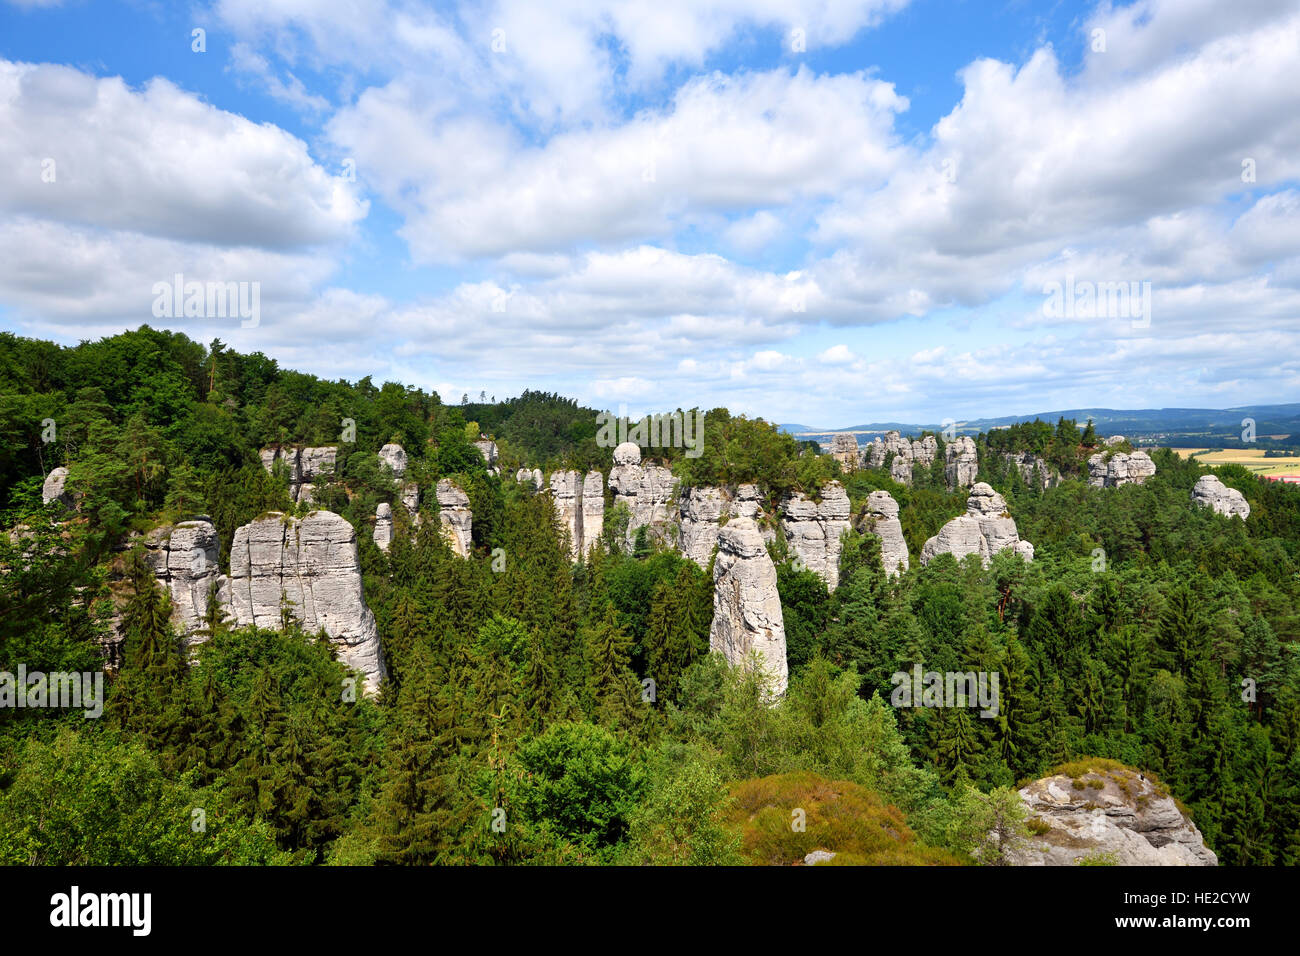 Sandstone rock towers in green forest area Stock Photo